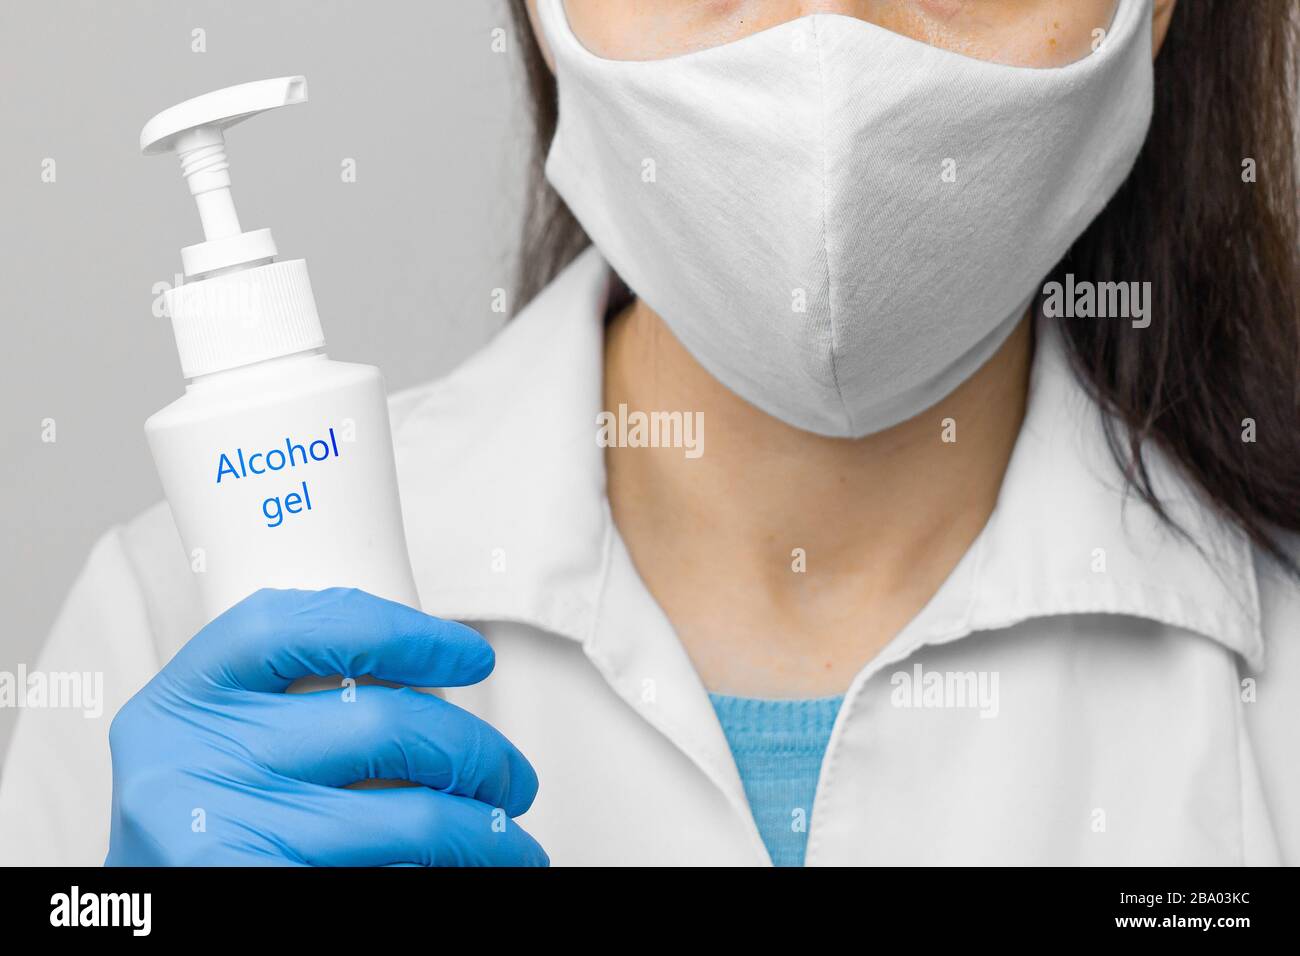 Coronavirus, flu virus and pandemia prevention with Alcohol gel in womans hands. Concept of doctors advice. Stock Photo